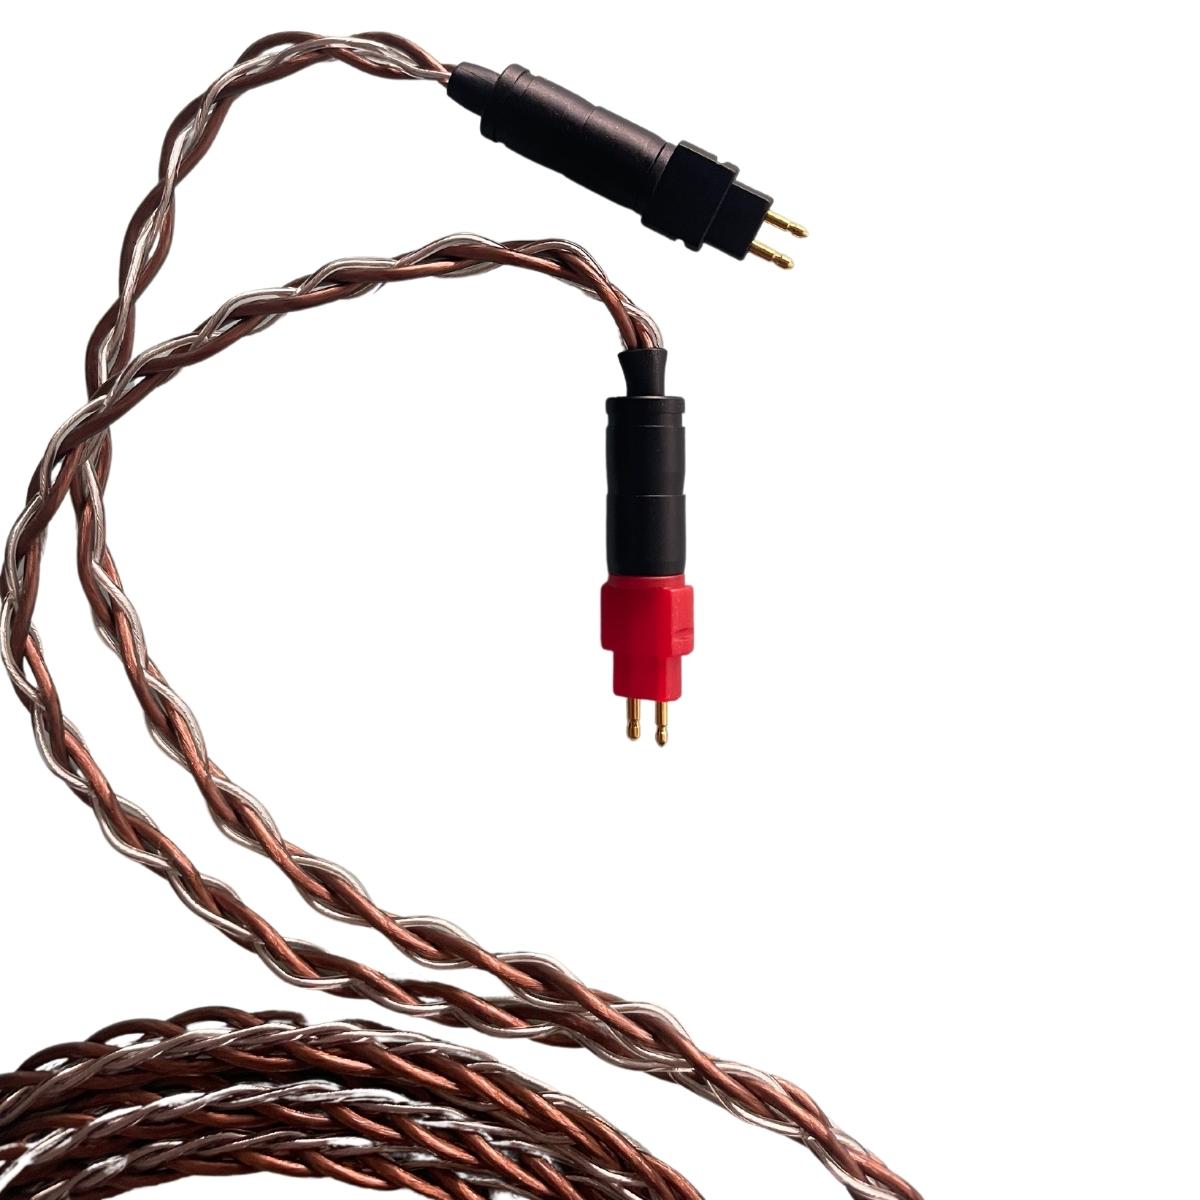 XINHS 8 Core Cable With Mic For Sennheiser HD650